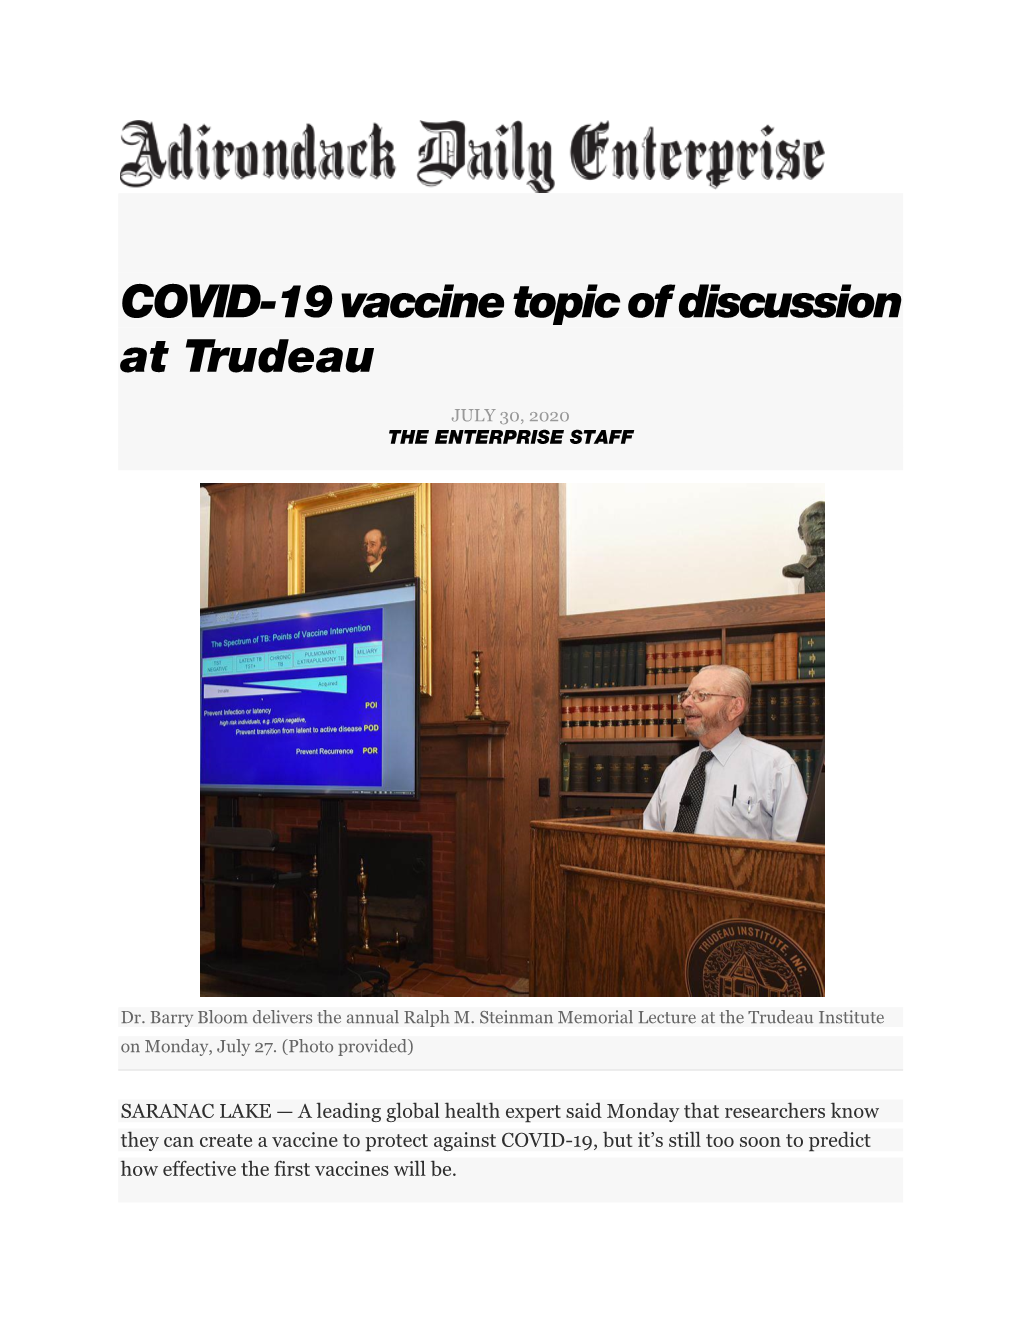 7/30/2020 COVID-19 Vaccine Topic of Discussion at TRUDEAU(Adk Daily Enterprise)